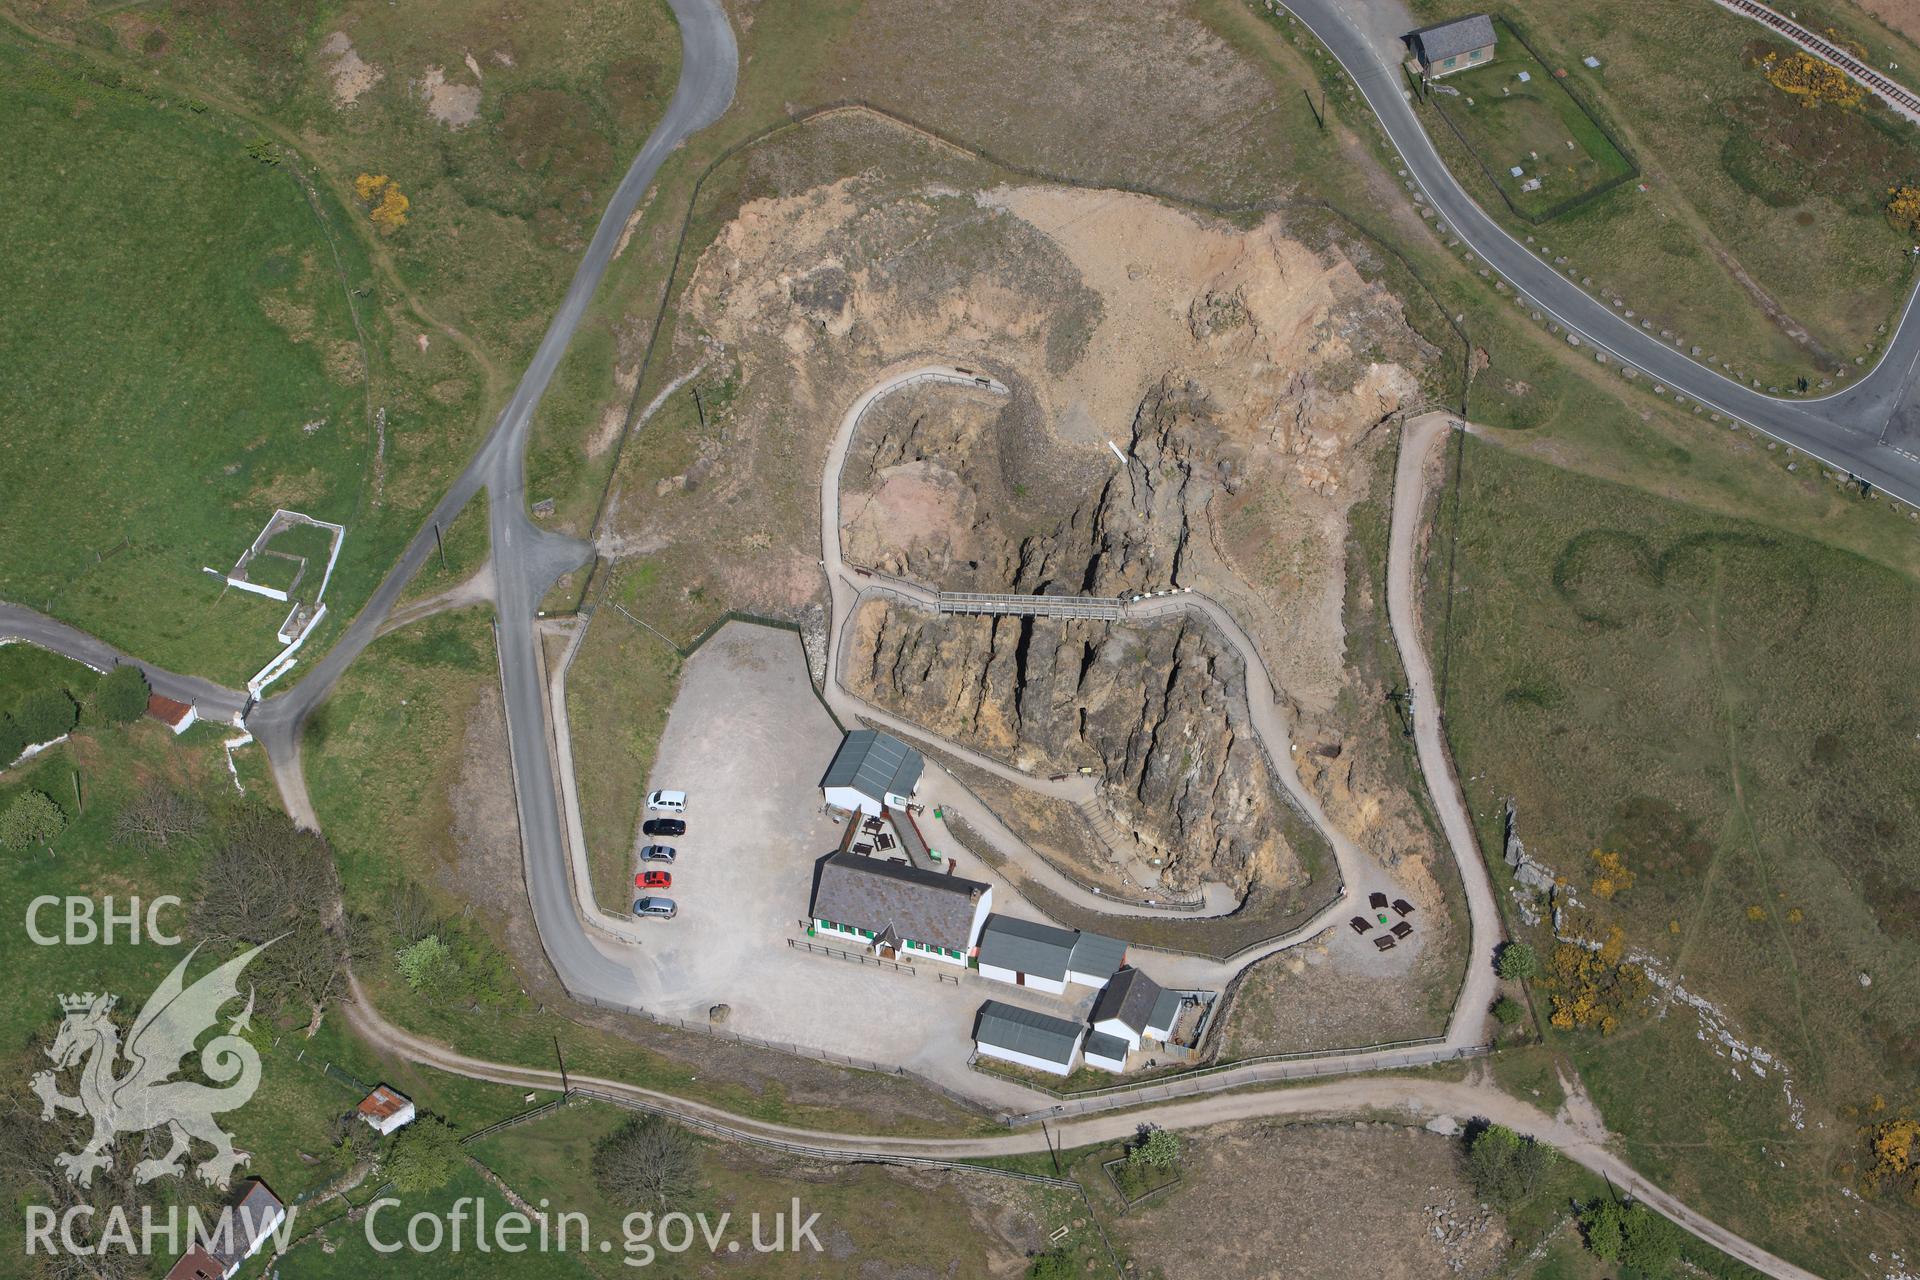 RCAHMW colour oblique photograph of Great Orme Copper Mine. Taken by Toby Driver on 03/05/2011.